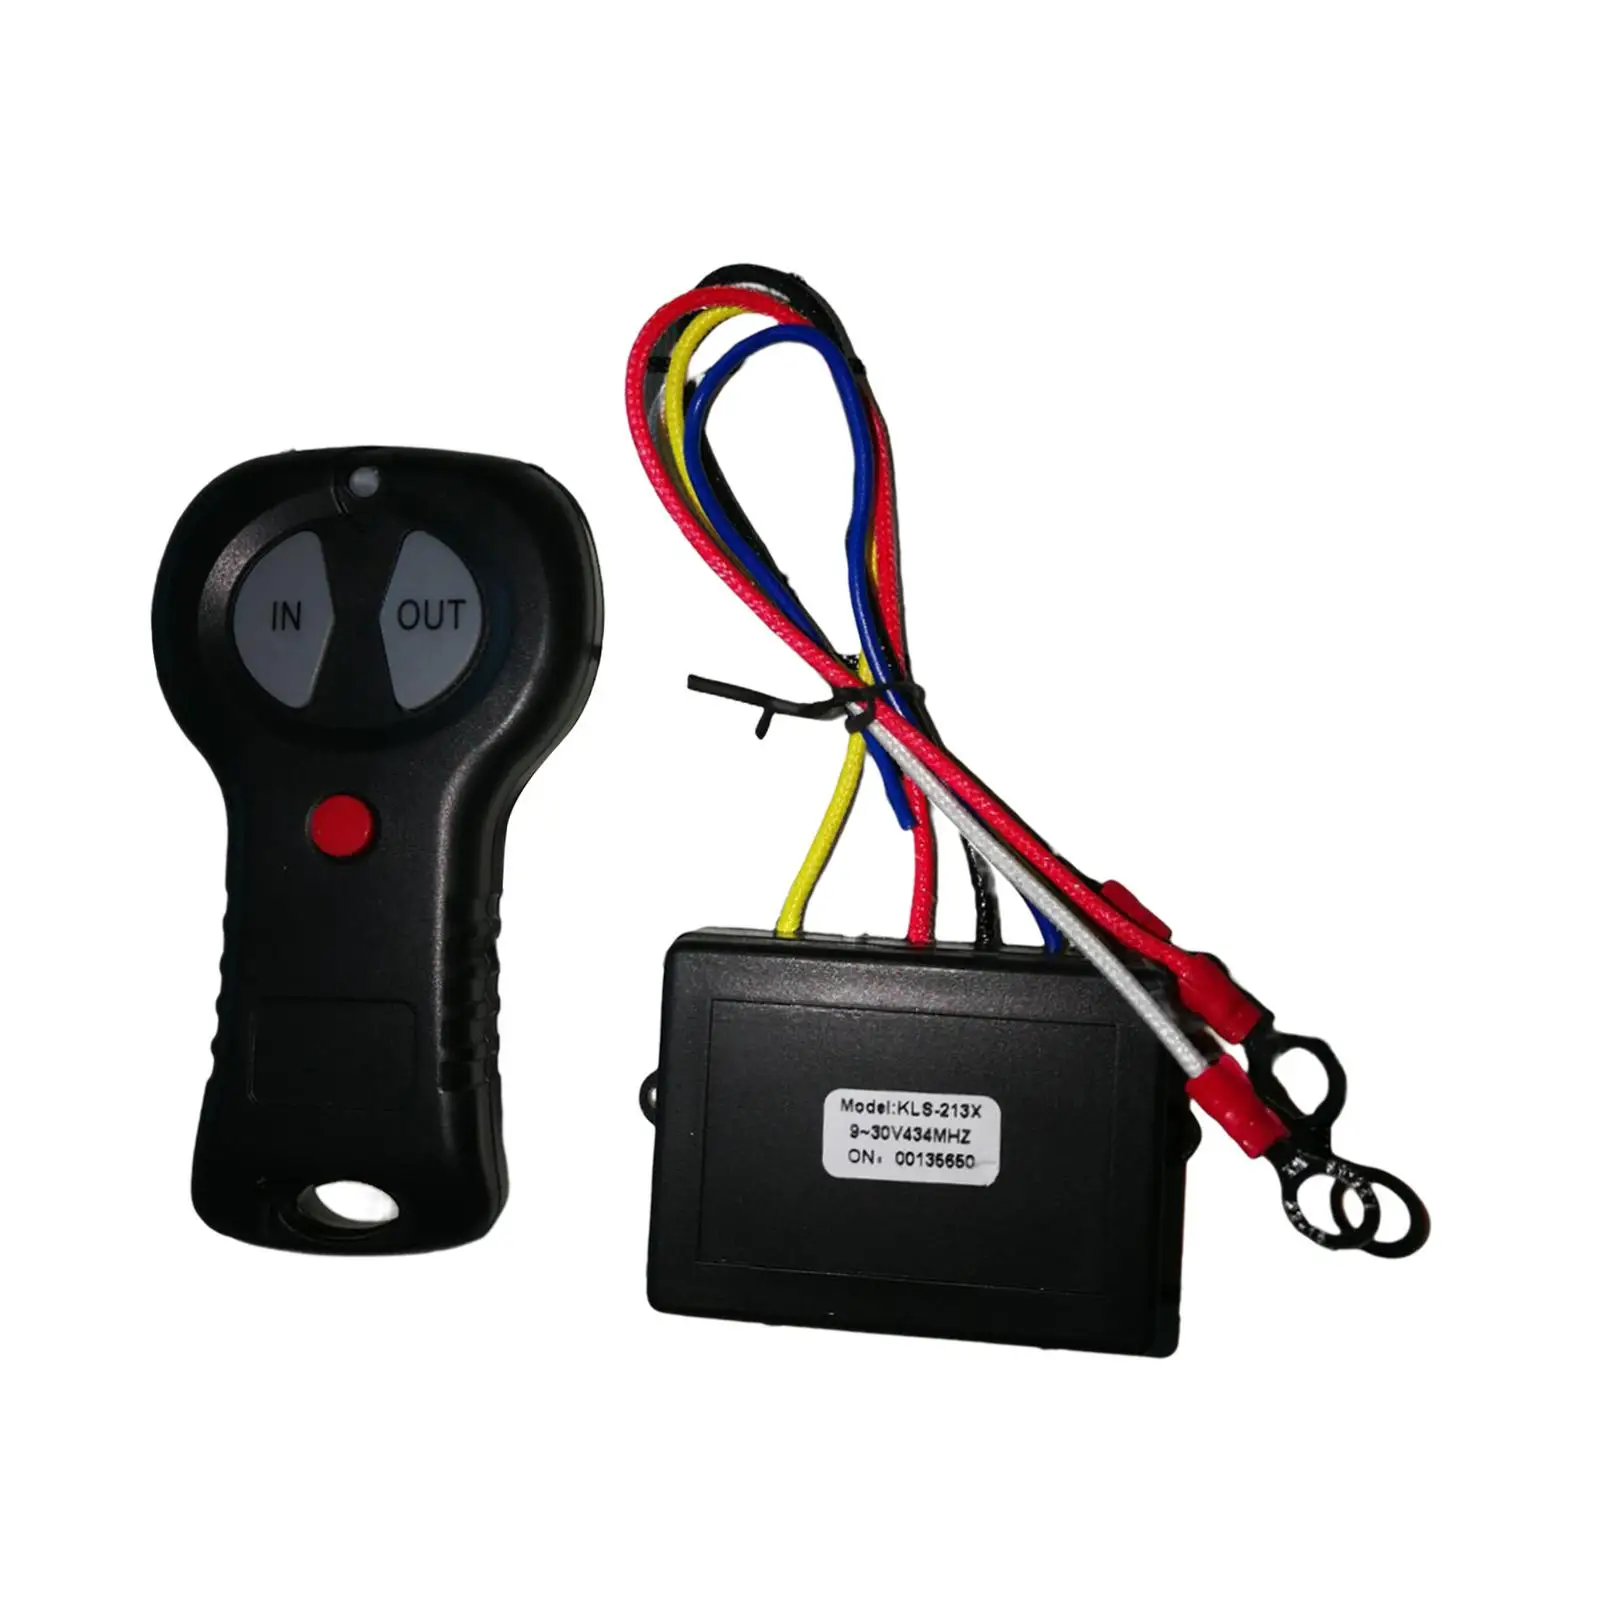 Winch Remote Control Universal with Indicator Light Waterproof for Auto